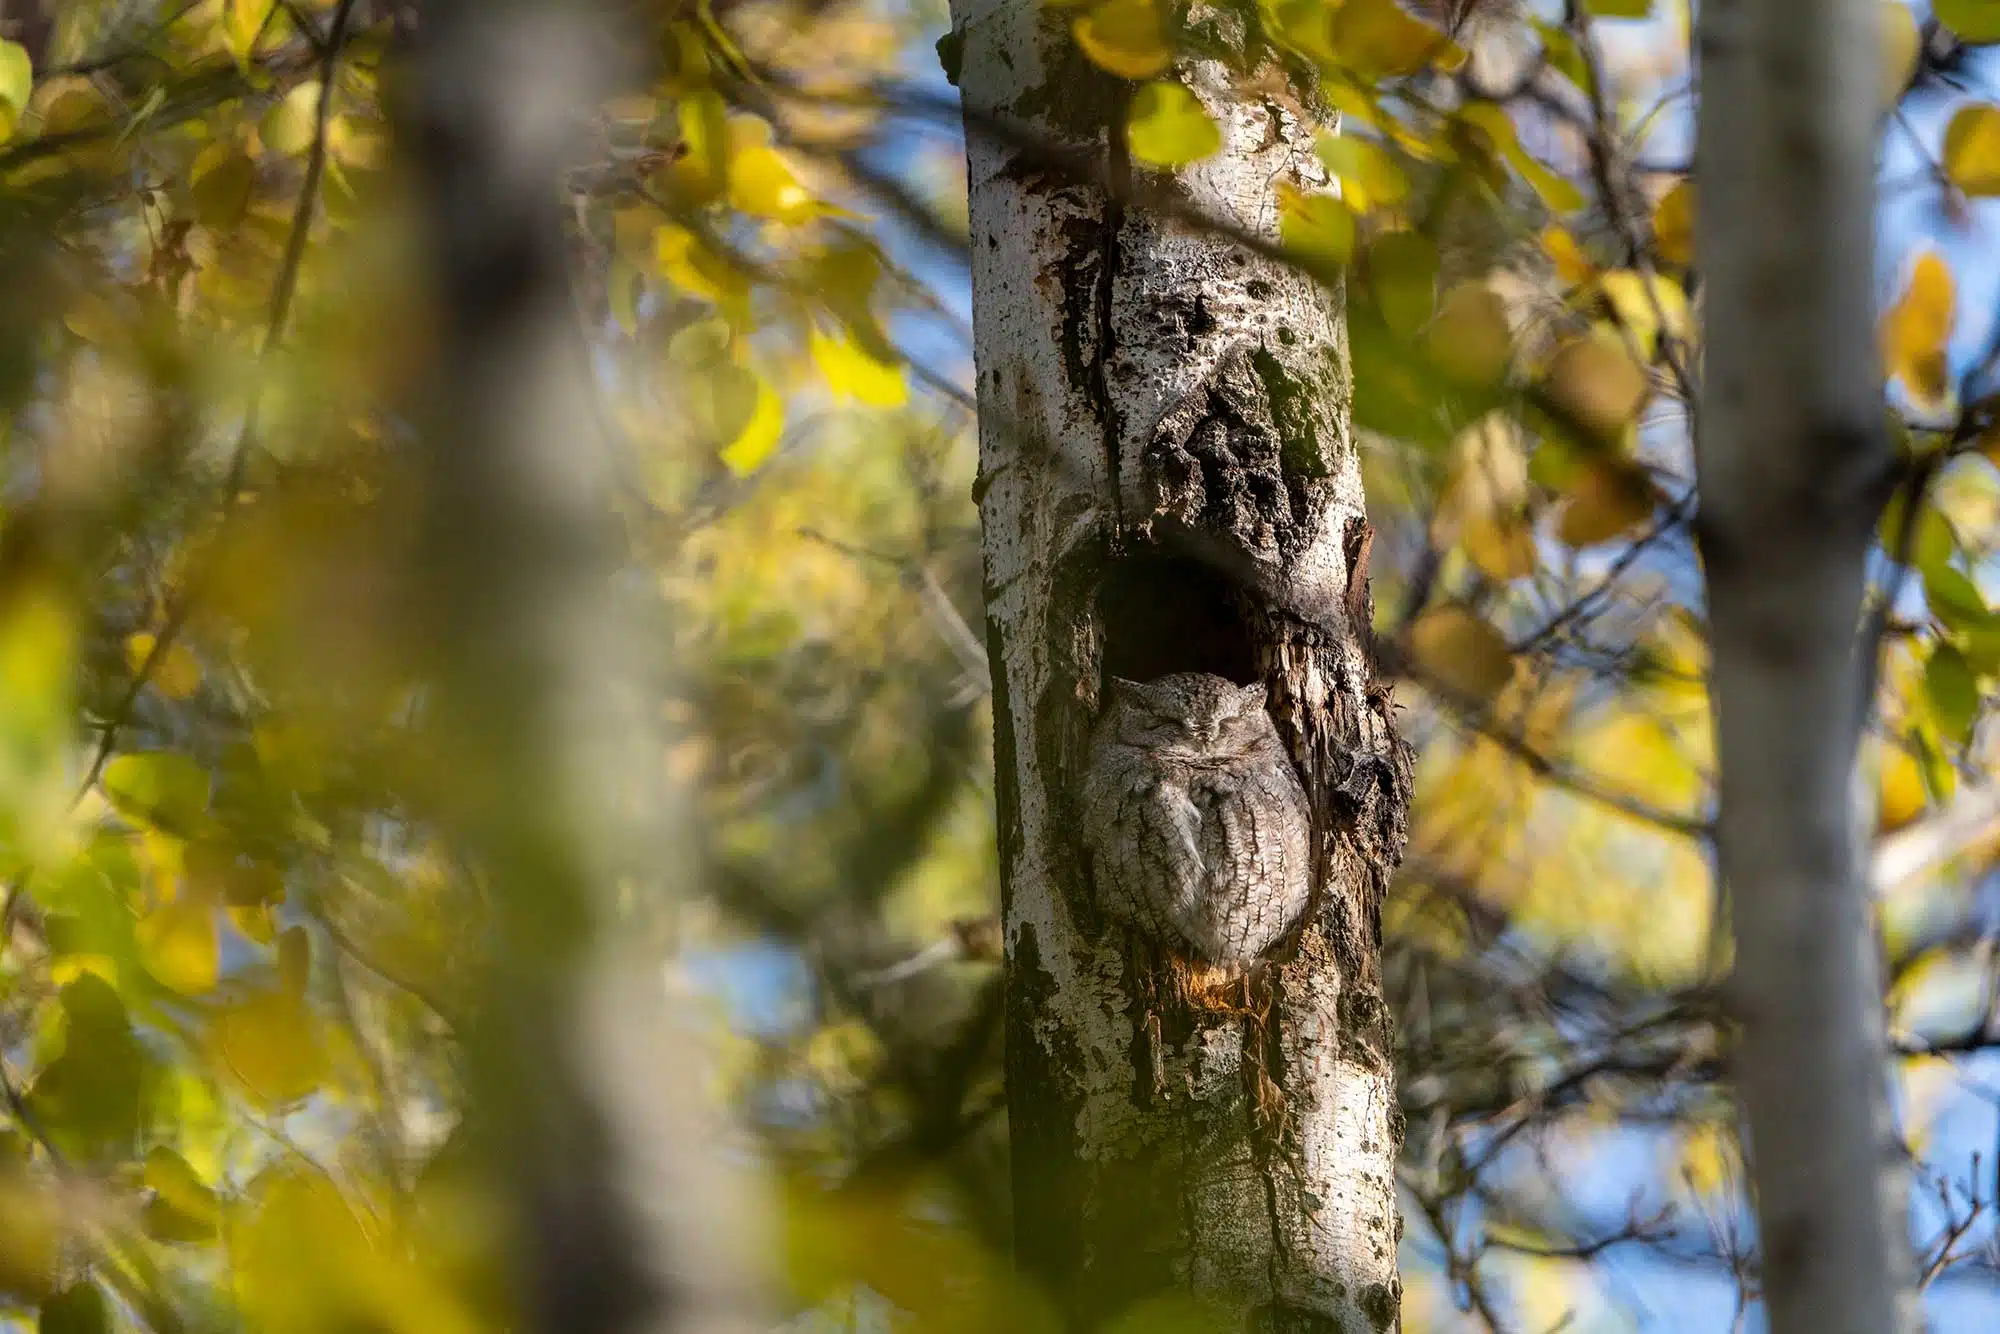 A screech owl in a tree in Manitoba.